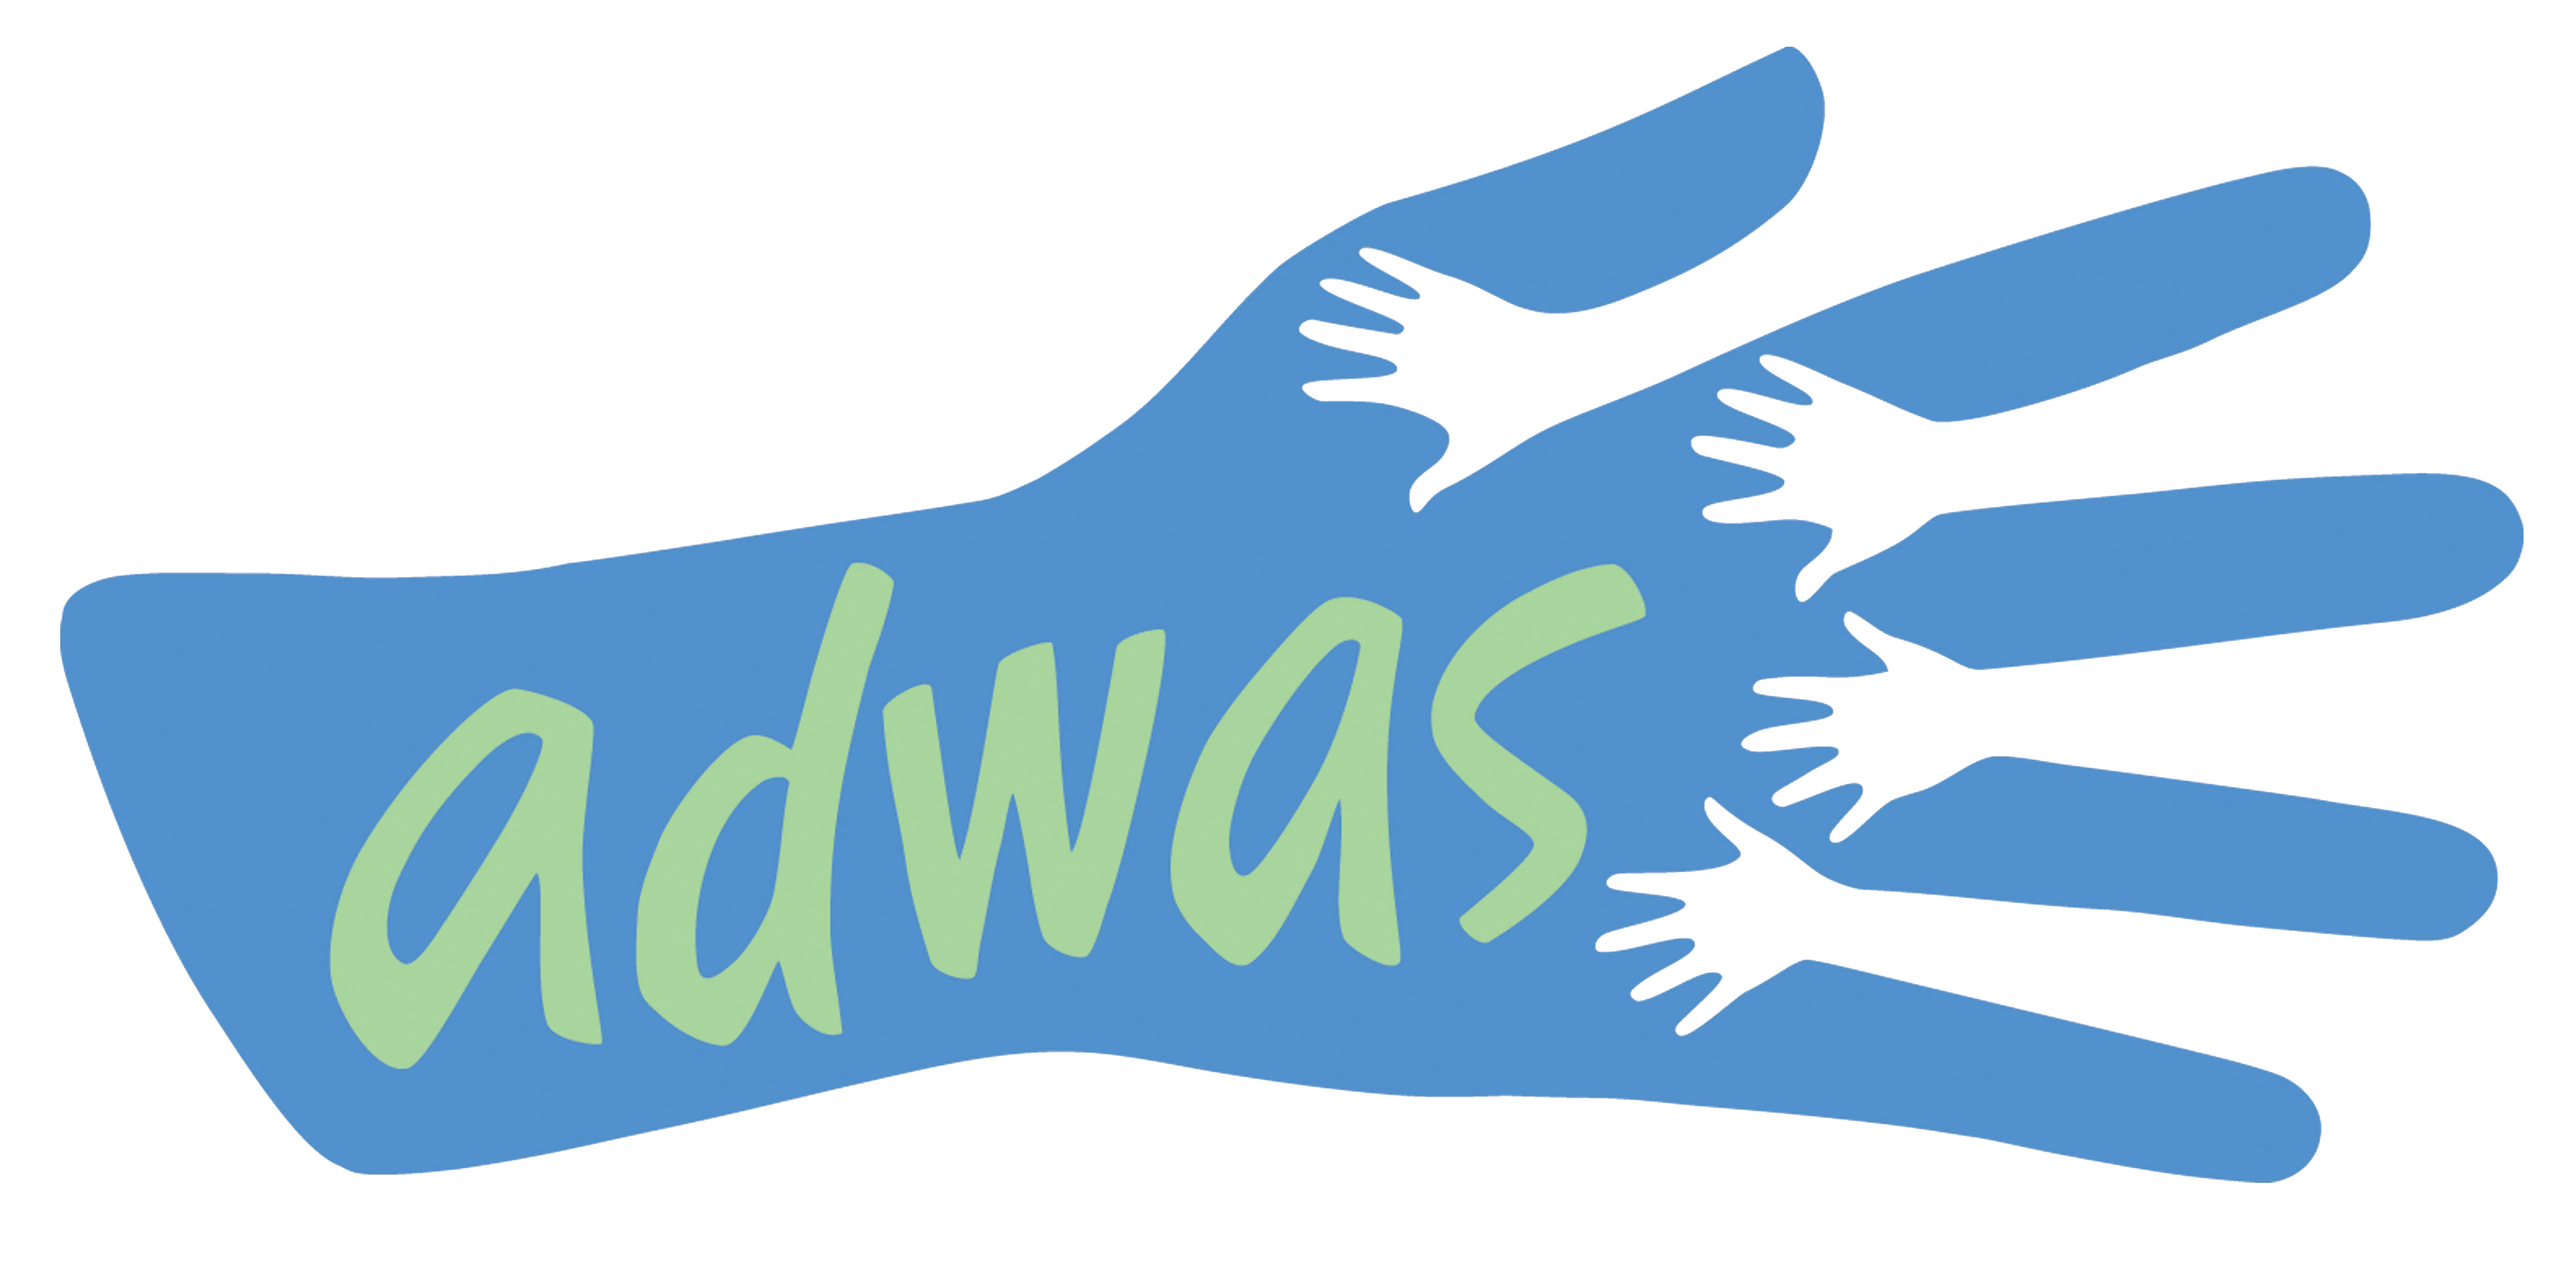 ADWAS logo, blue hand with 4 white hands holding on it with adwas in green text